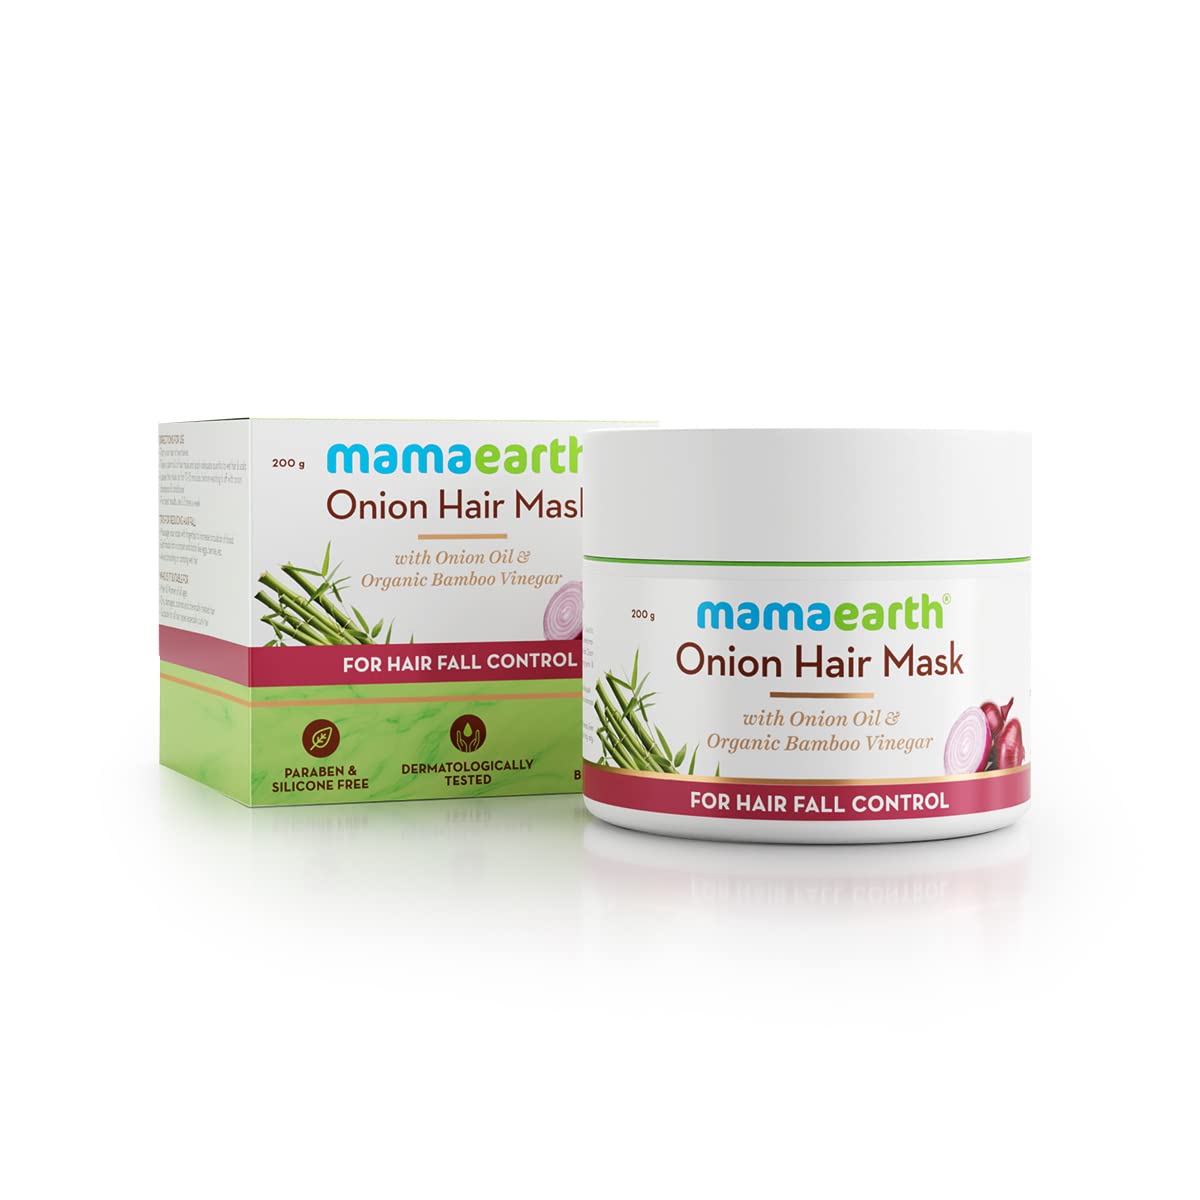 Mamaearth Onion Hair Mask With Onion Oil And Organic Bamboo Vinegar For Hair Fall Control, 200g